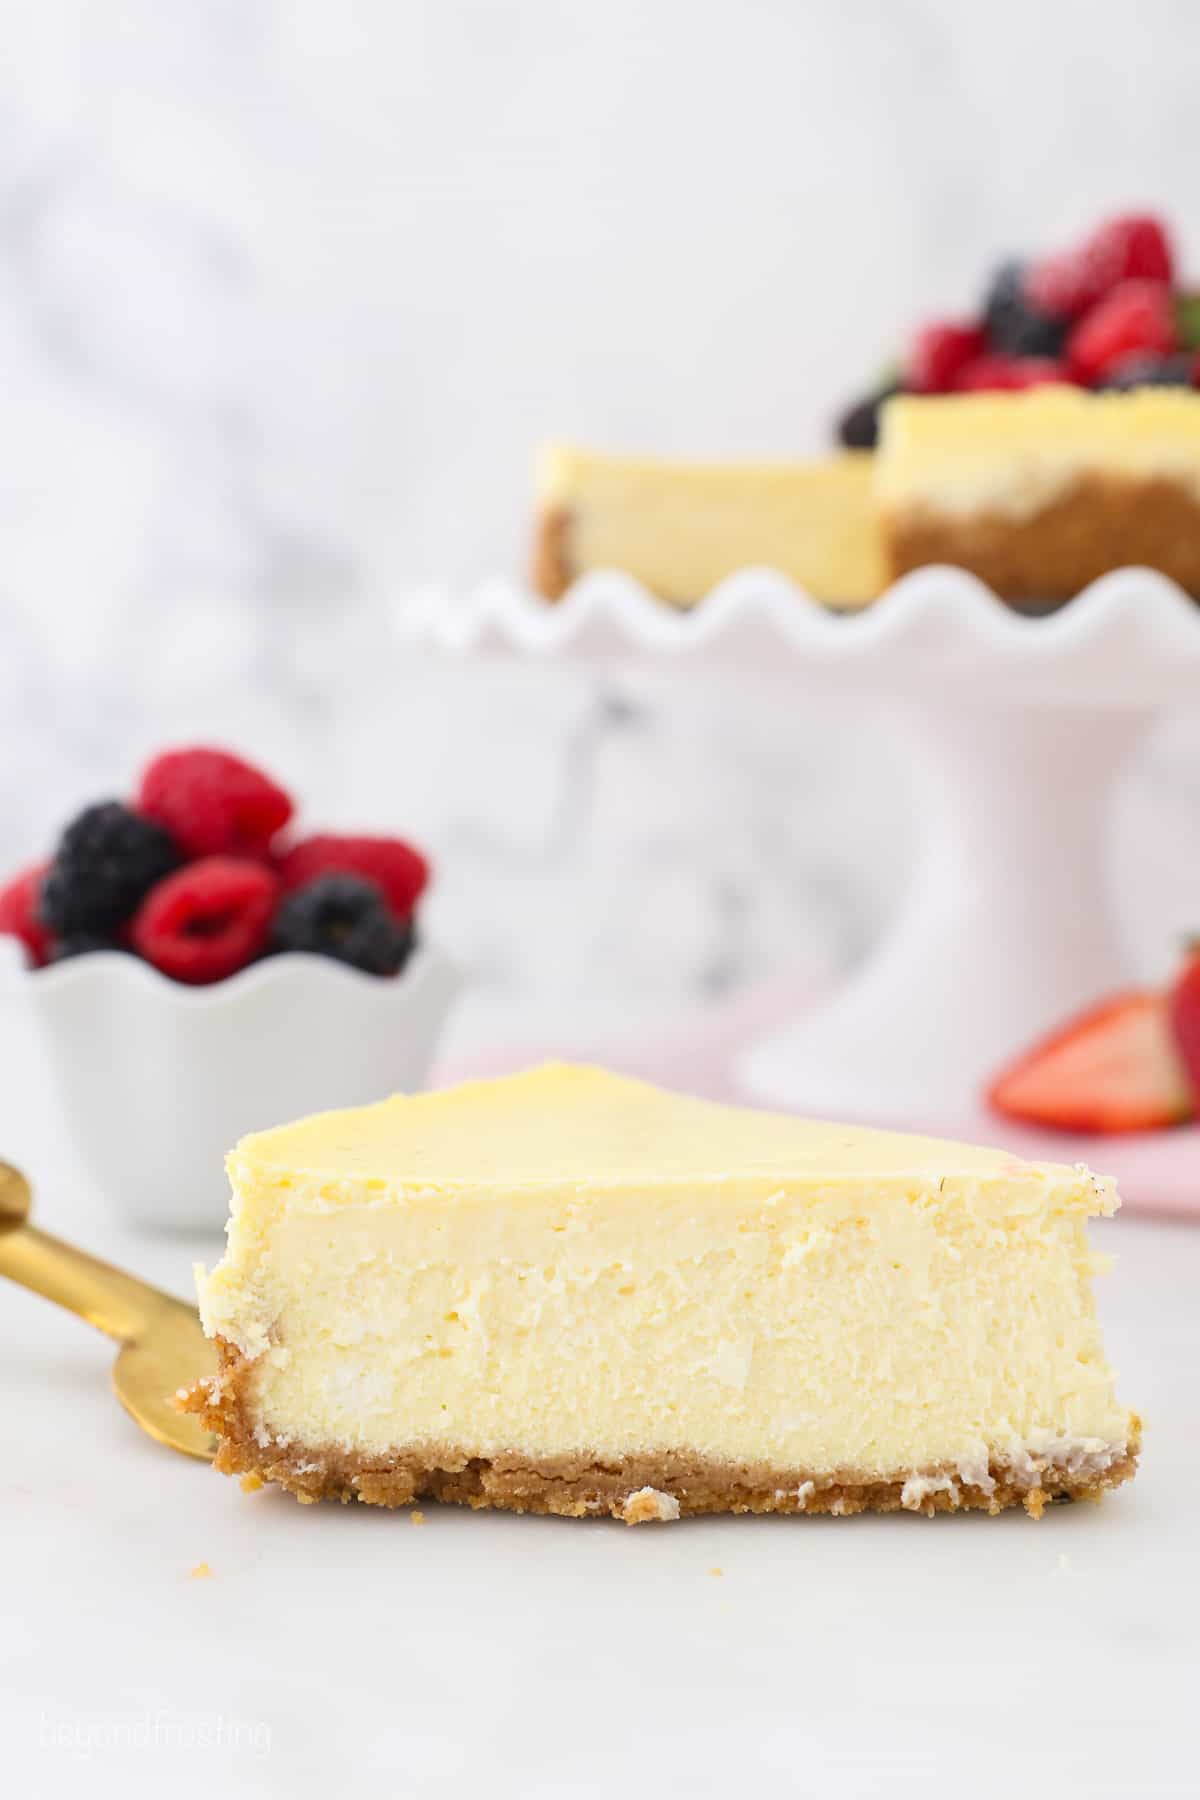 A slice of homemade cheesecake on a gold cake server, with the rest of the cheesecake on a cake stand in the background.